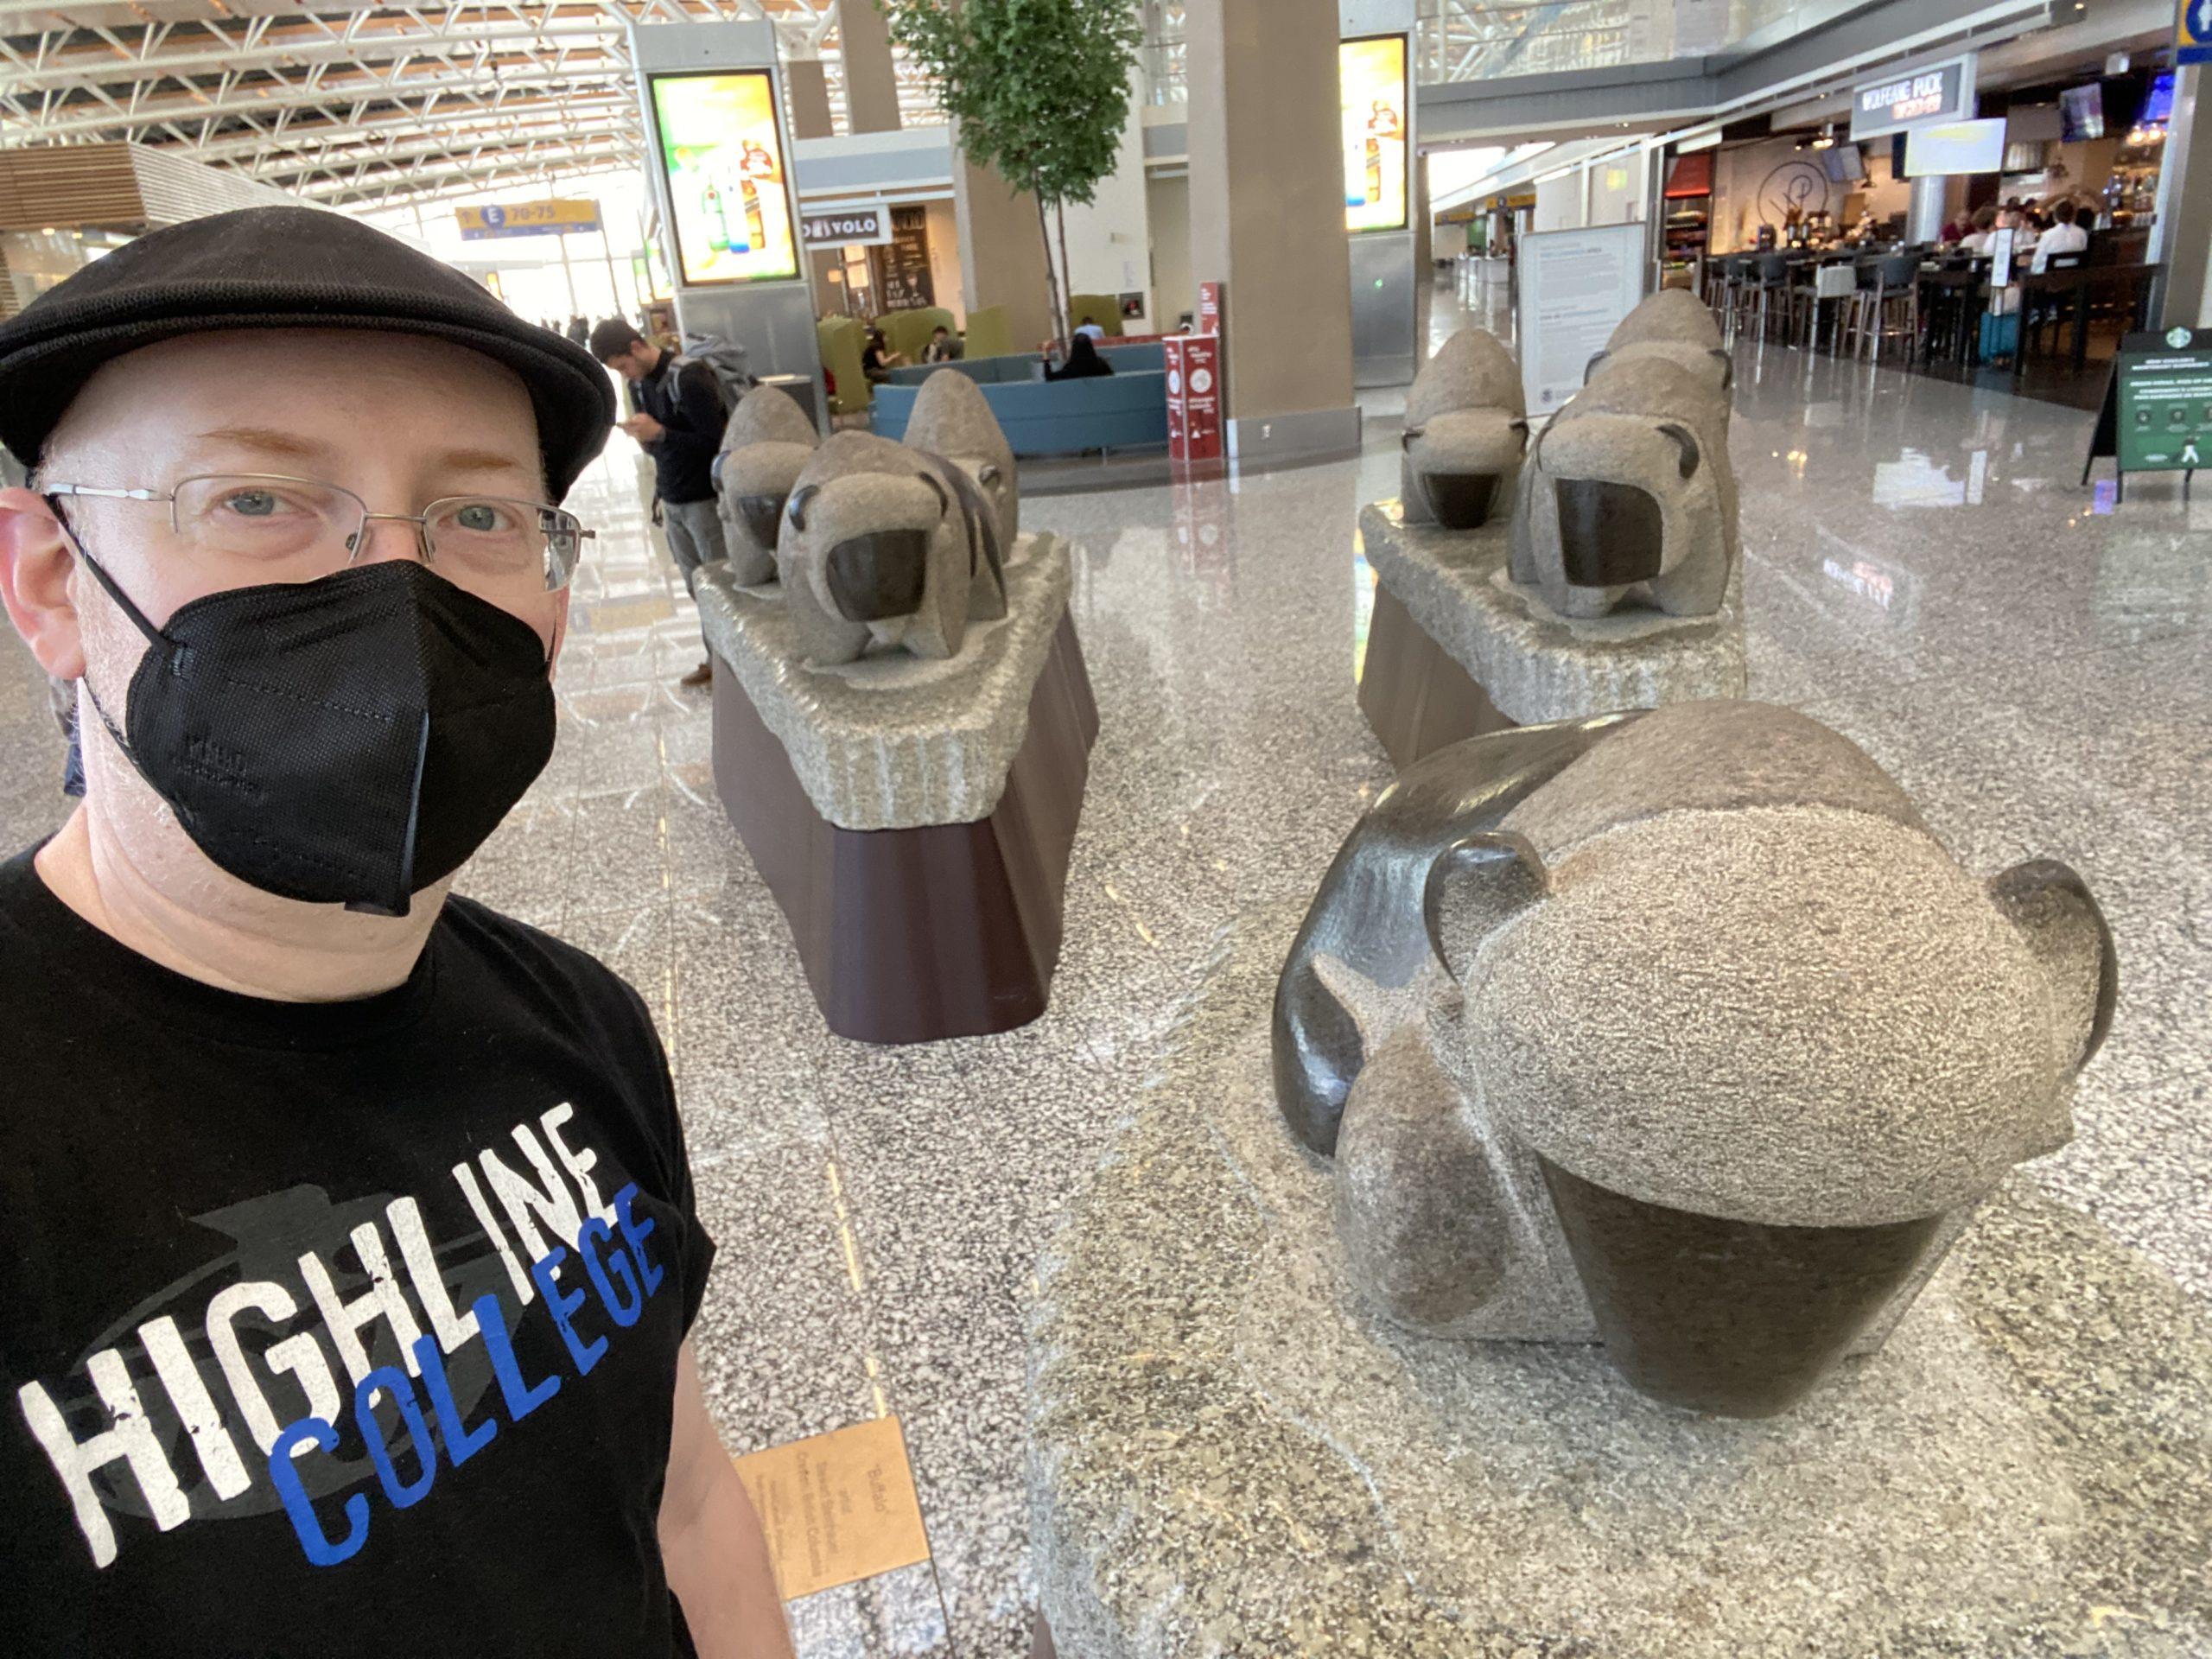 Me standing in front of an airport sculpture of bison, done in a very rounded and cute style.